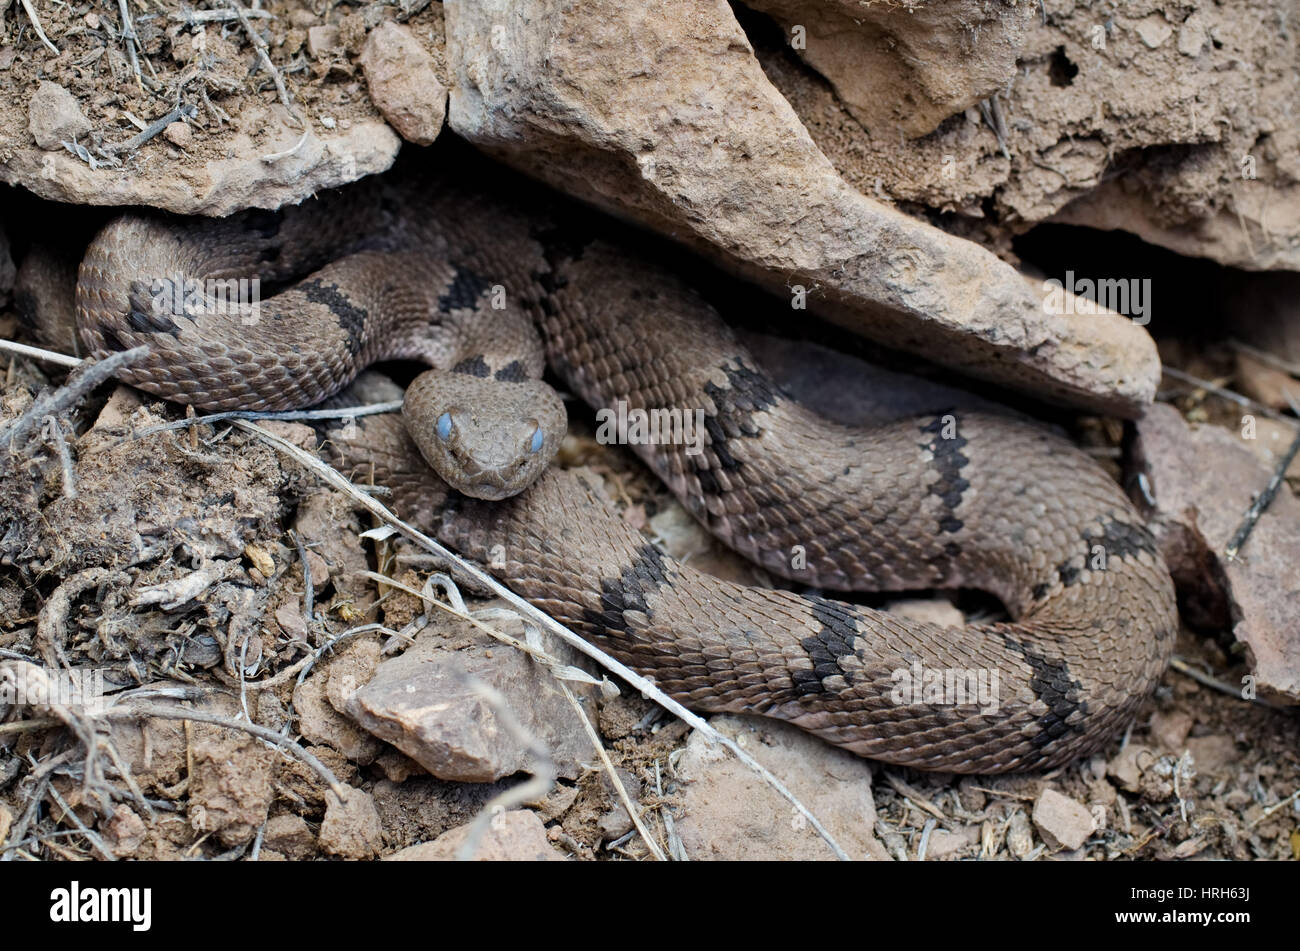 Female Banded Rock Snake that is soon going to shed her skin, (opaque). Stock Photo